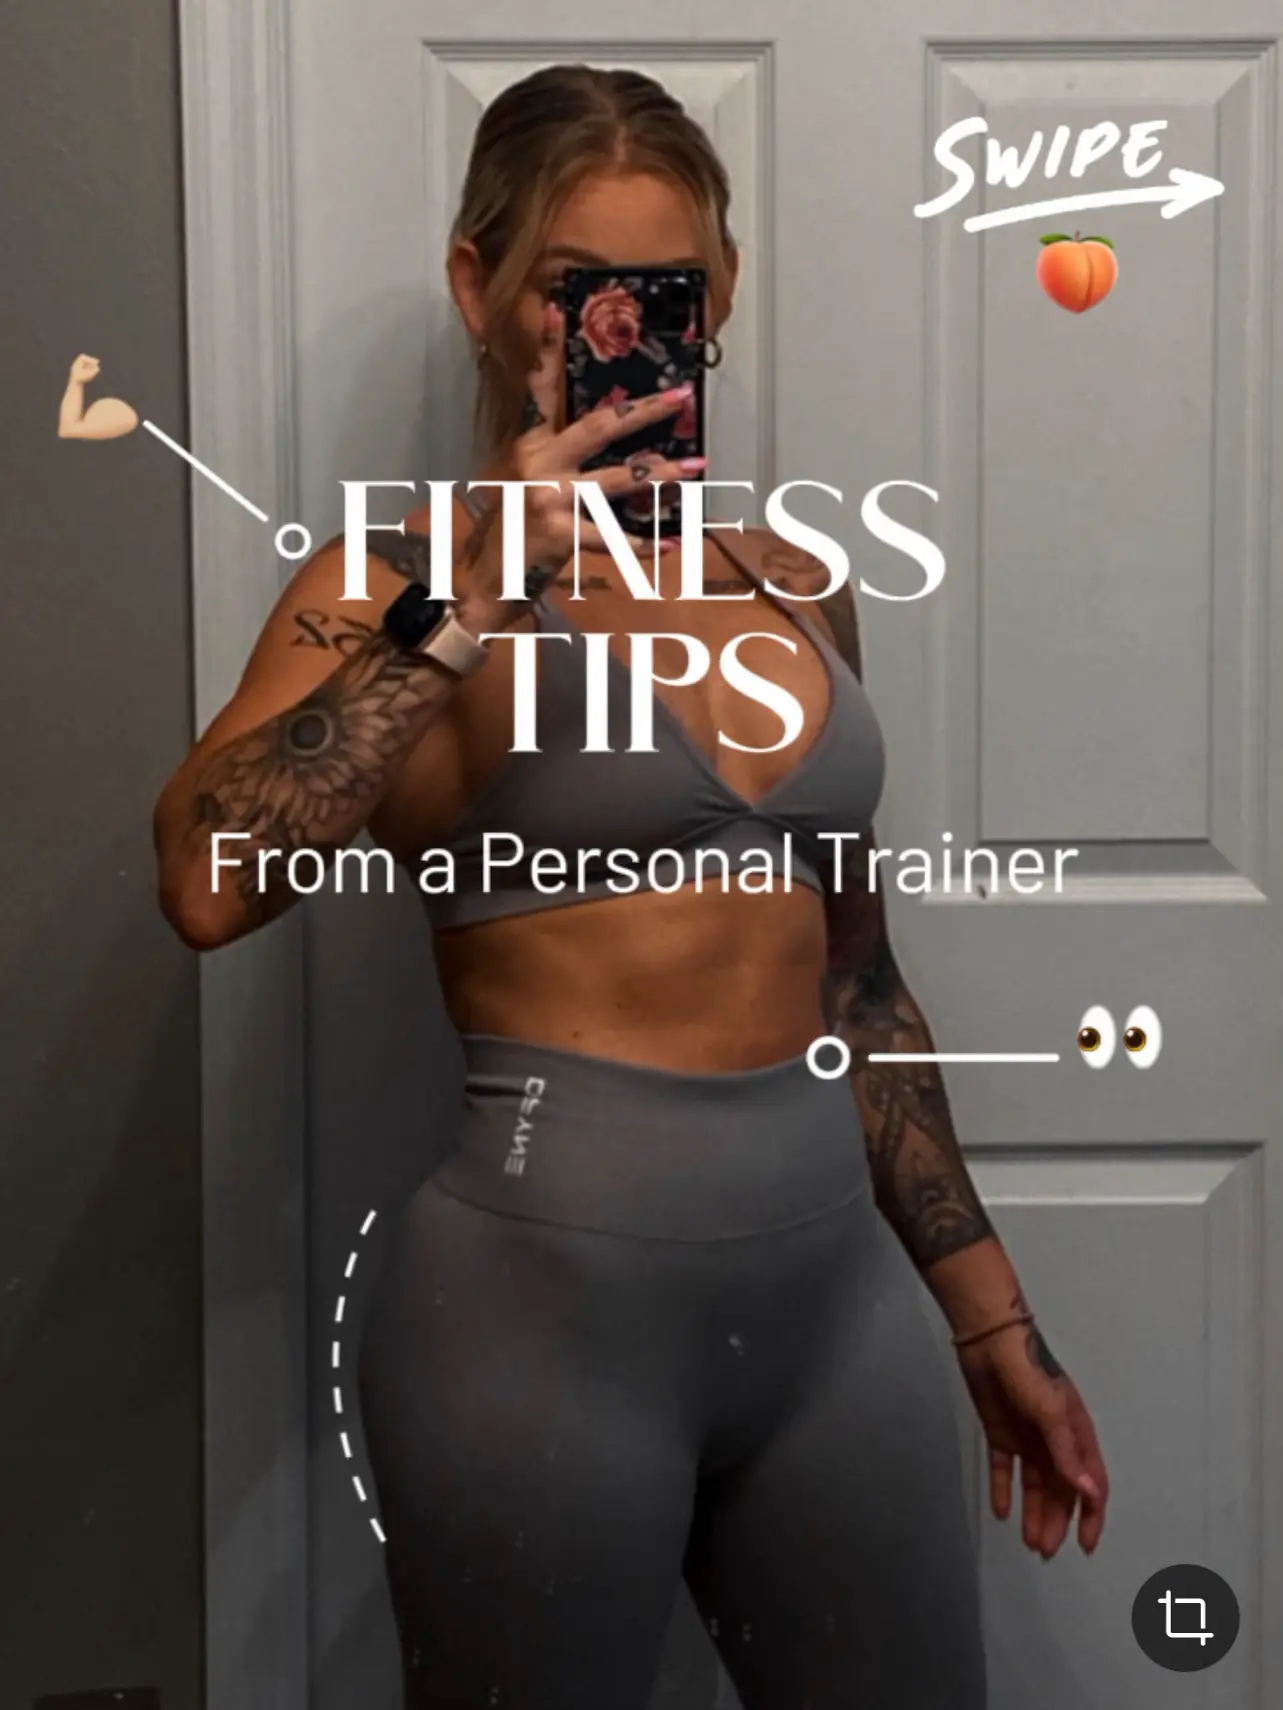 fitness fashioness (@fitnessfashioness) • Instagram photos and videos